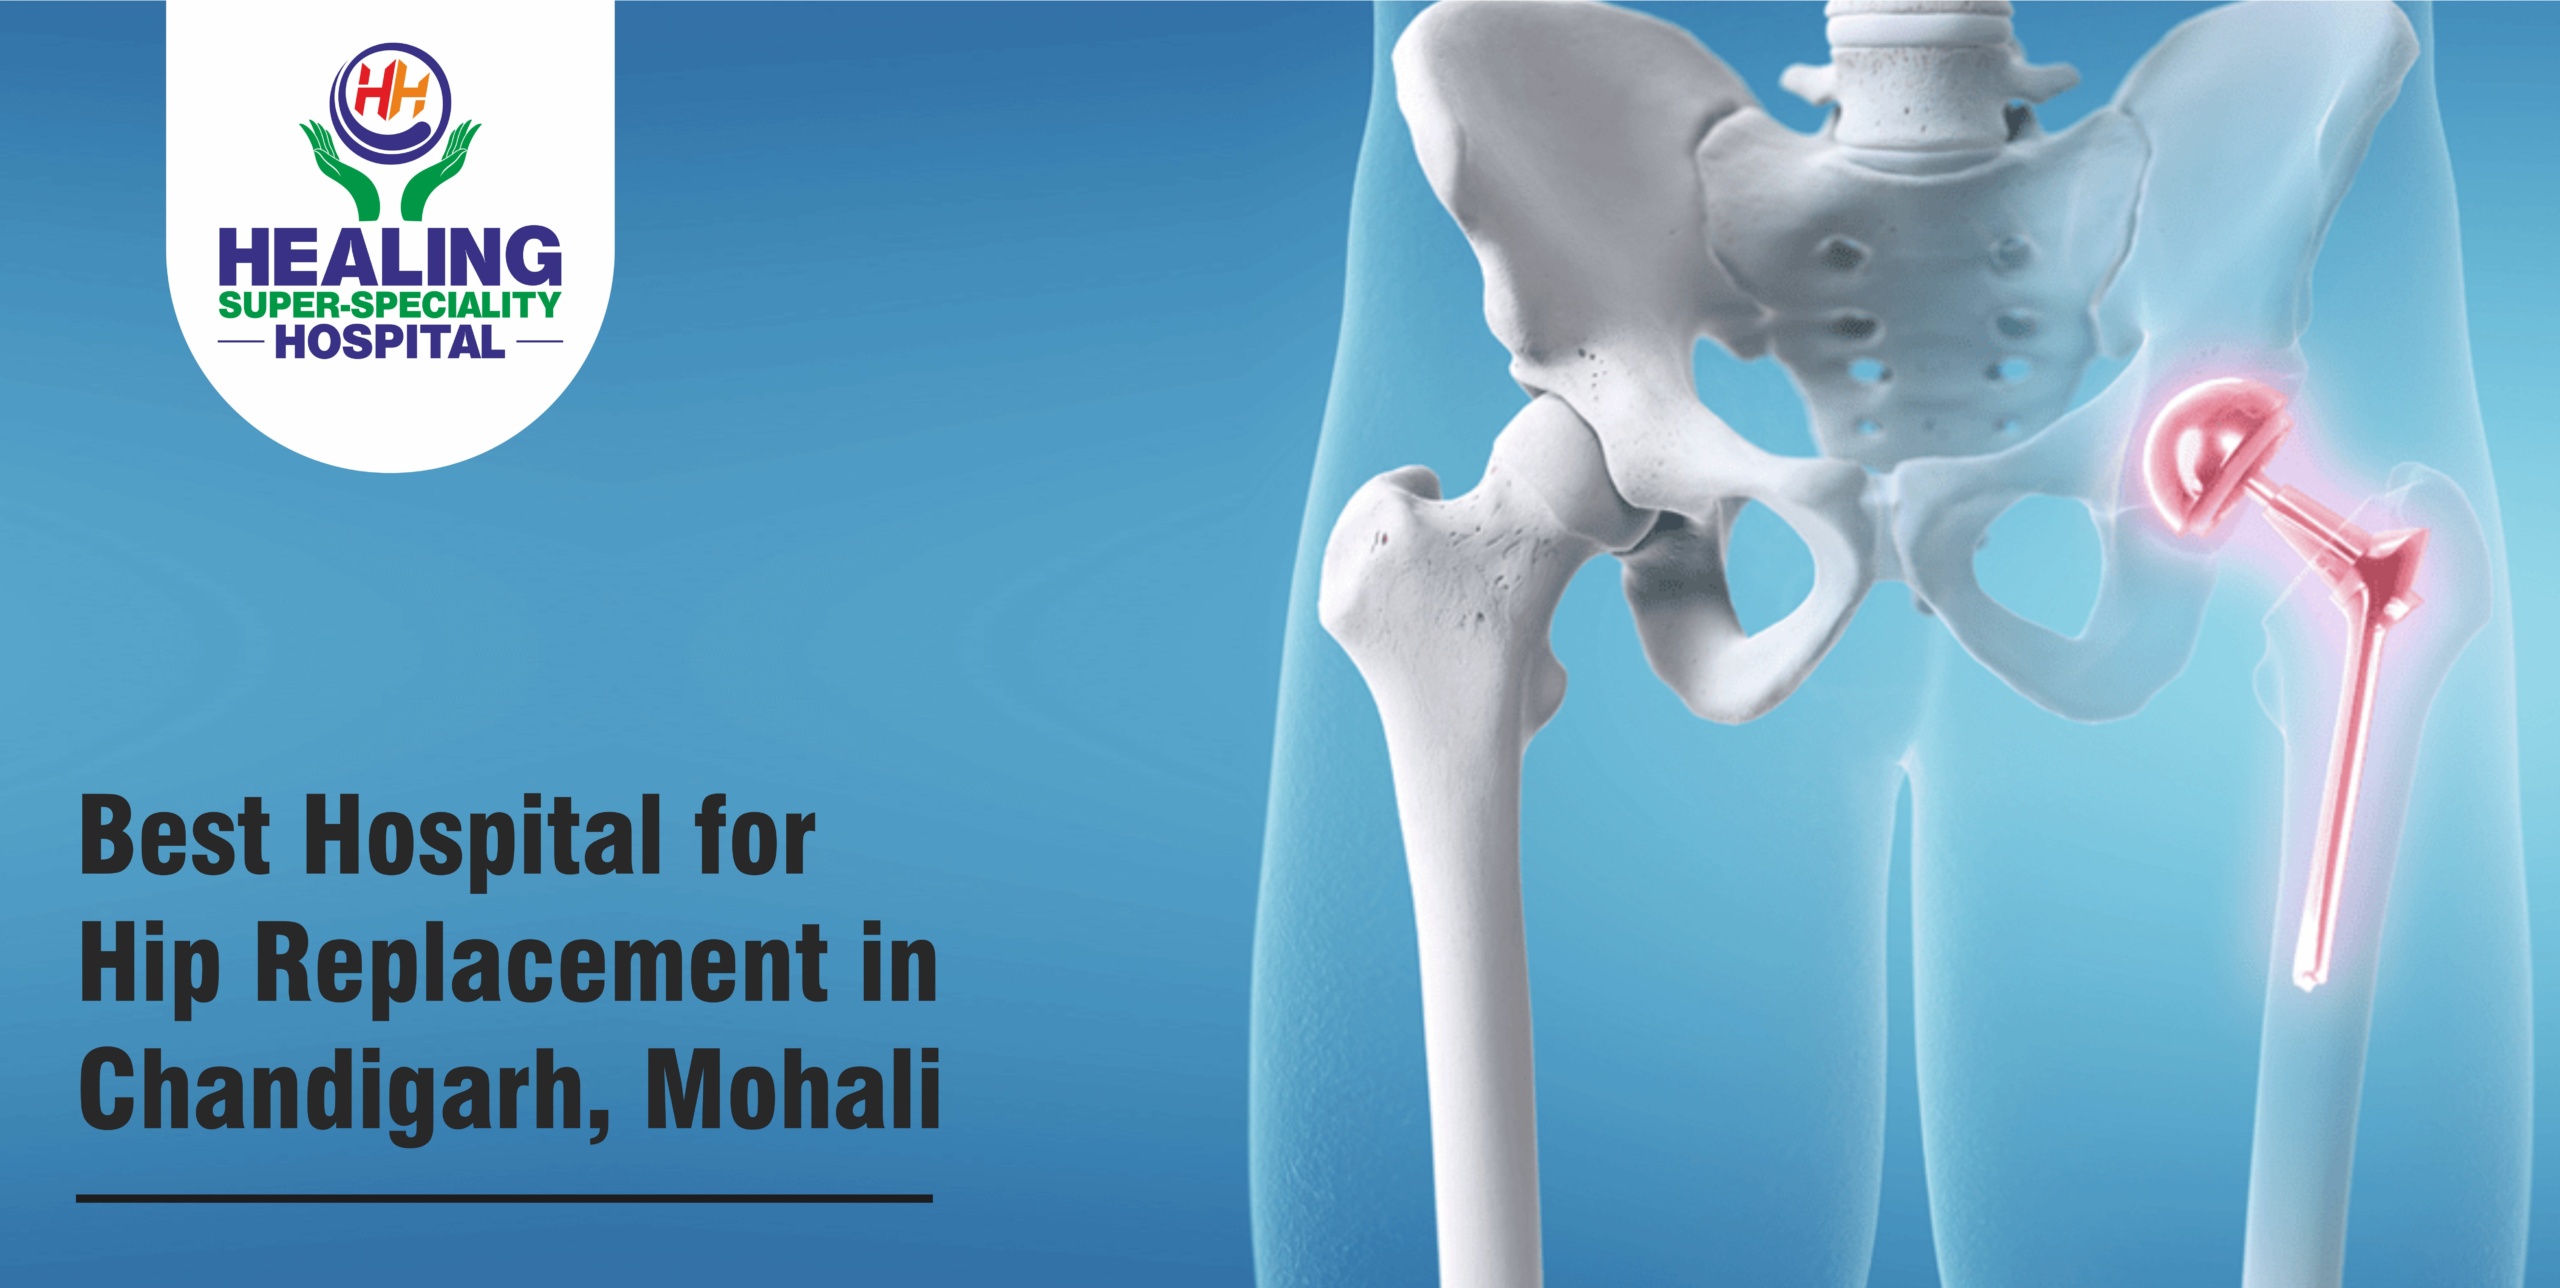 Best Hospital for Hip Replacement in Chandigarh, Mohali